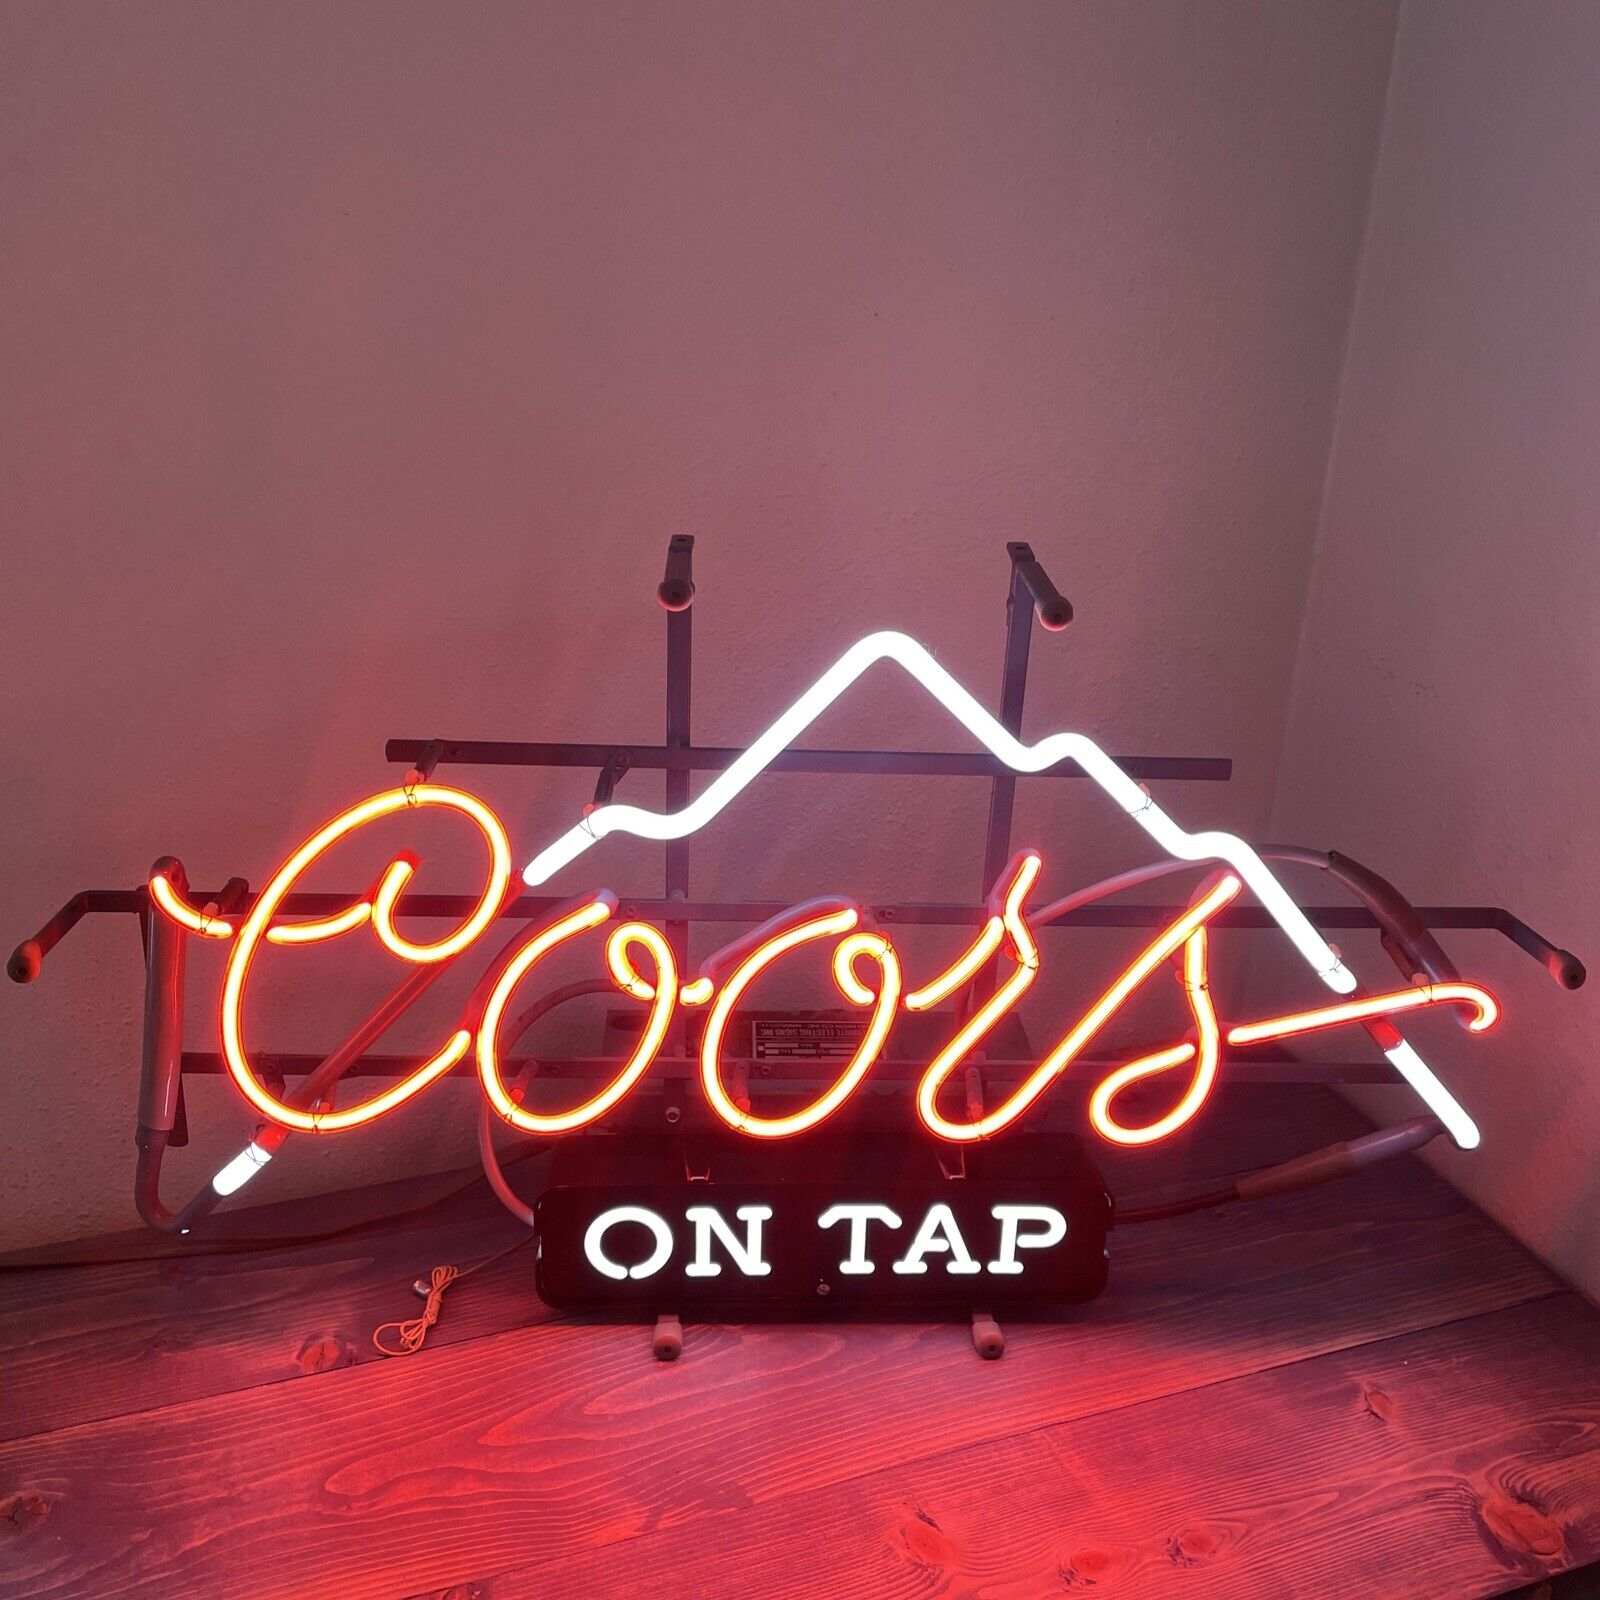 Vintage 1984 Coors On Tap Beer Neon Advertisement Sign, TESTED WORKS GREAT